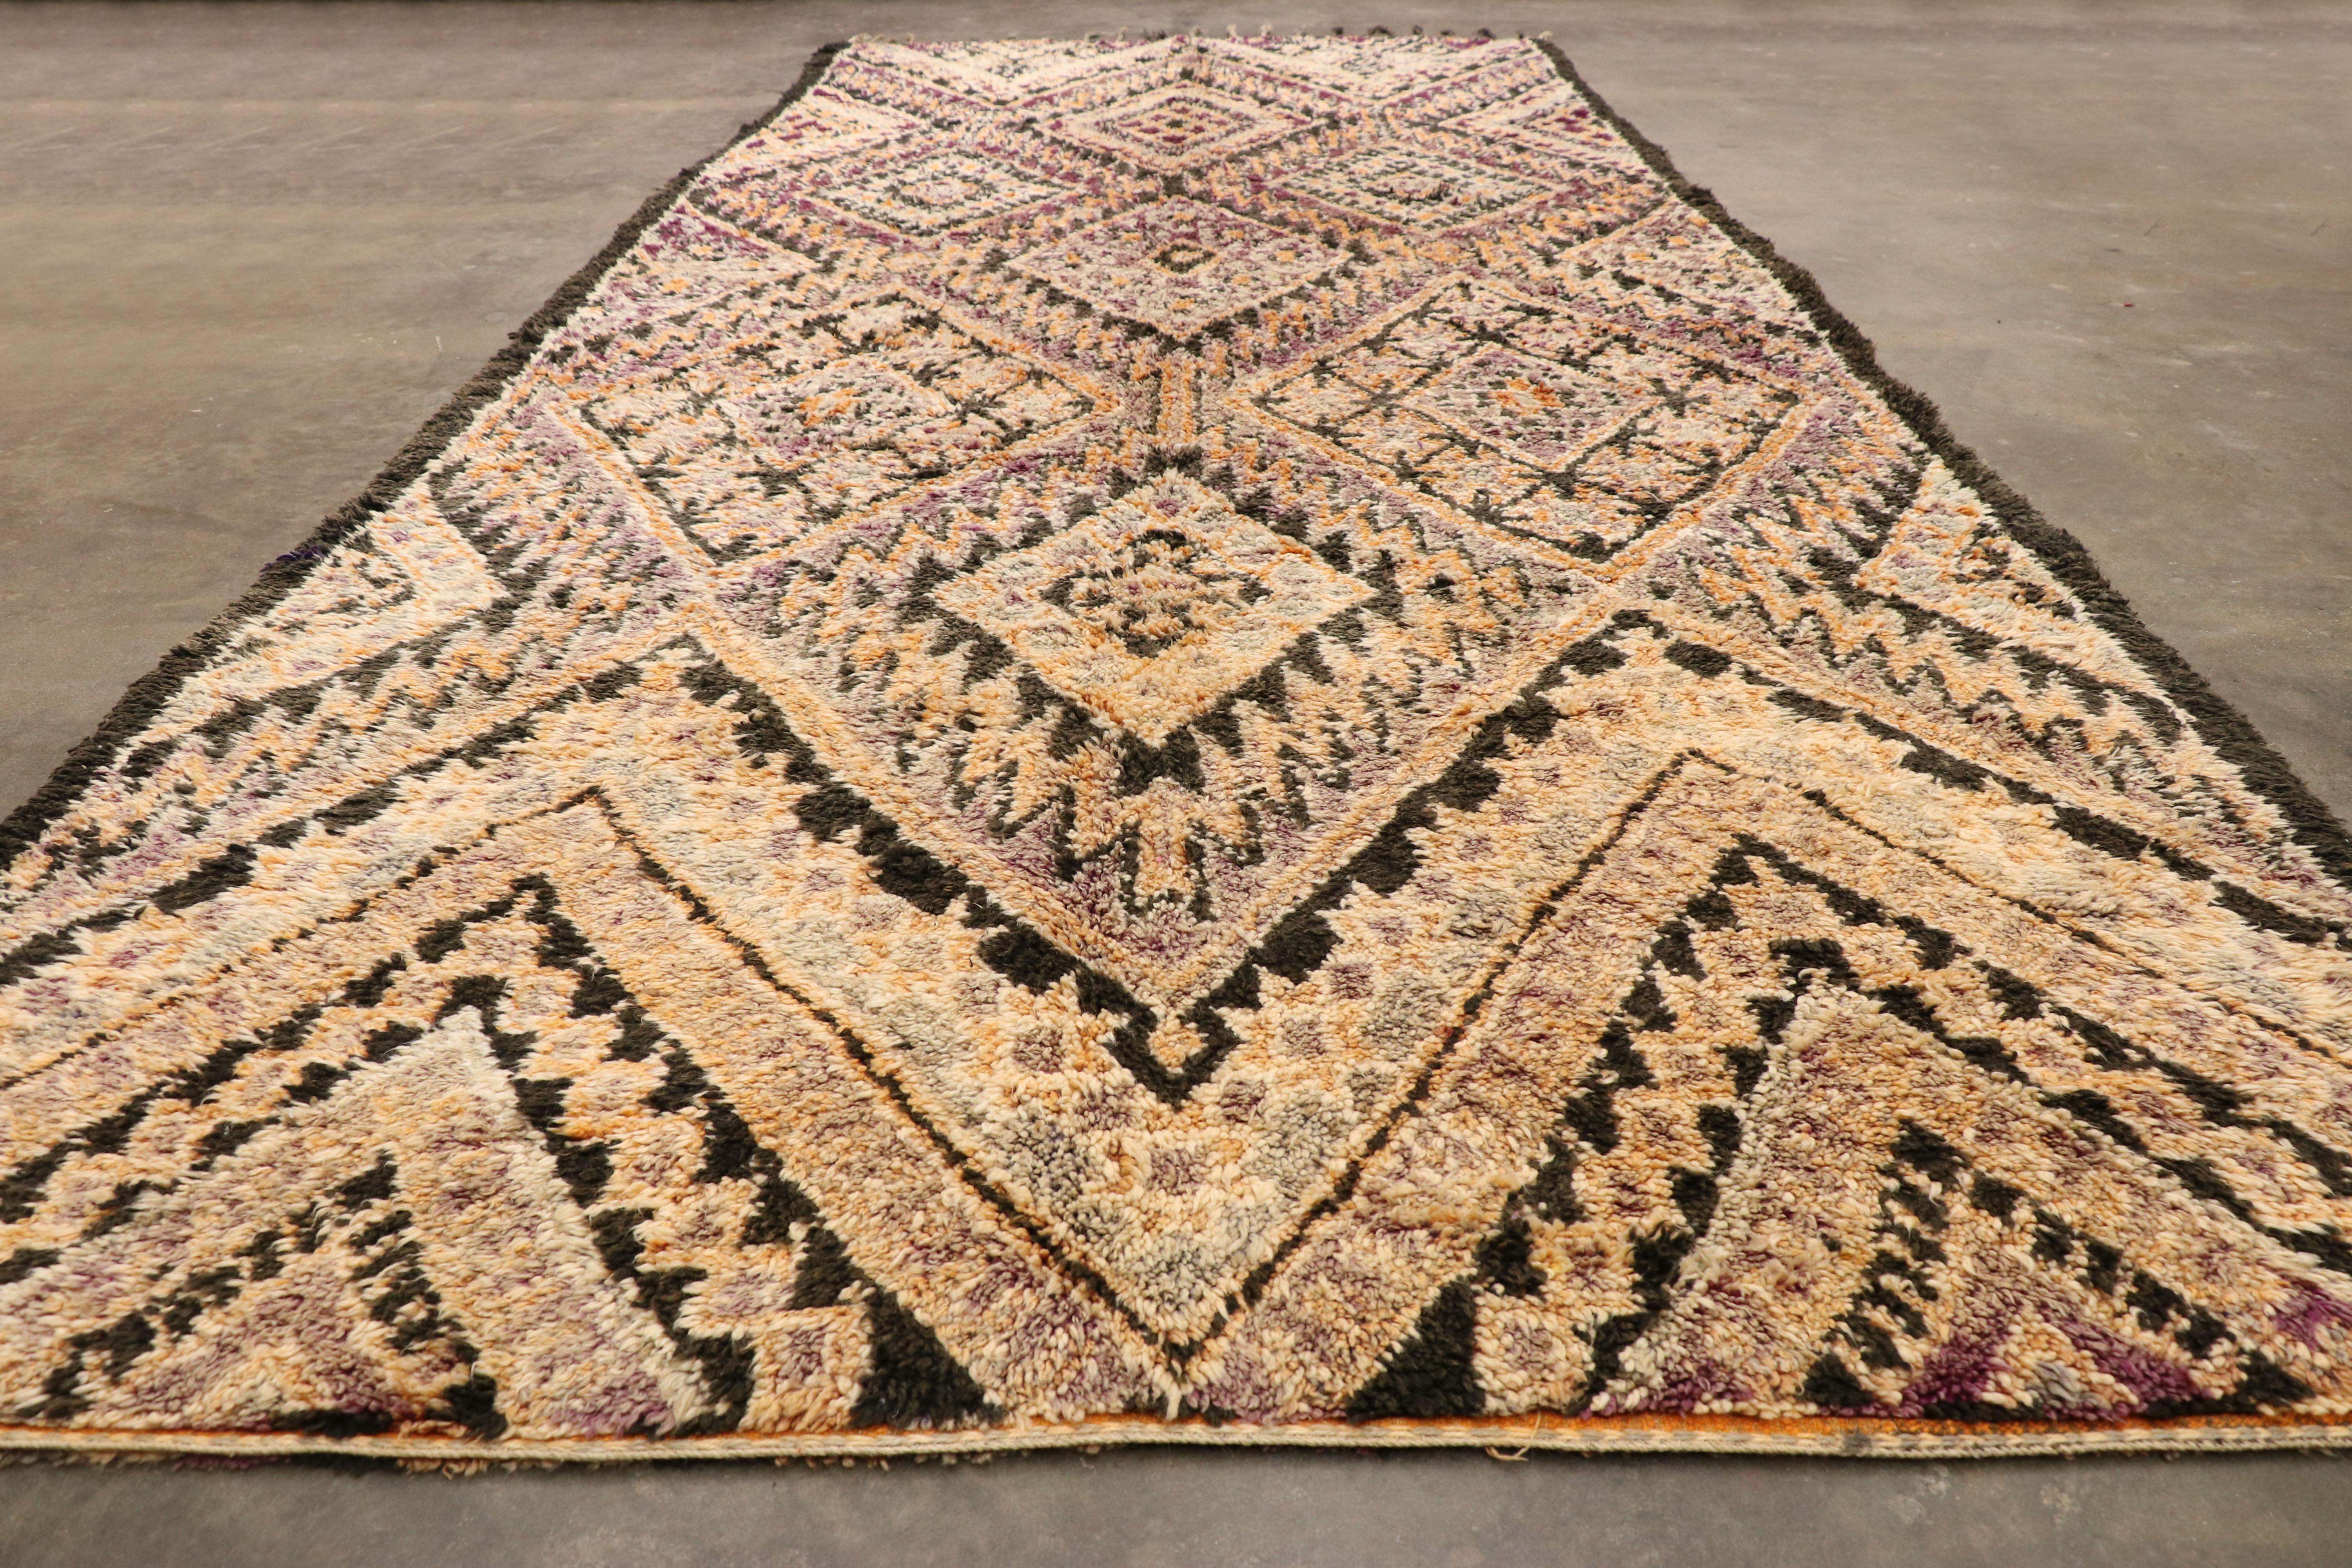 Vintage Brown Beni MGuild Moroccan Rug, Earthy Boho Chic Meets Midcentury For Sale 2